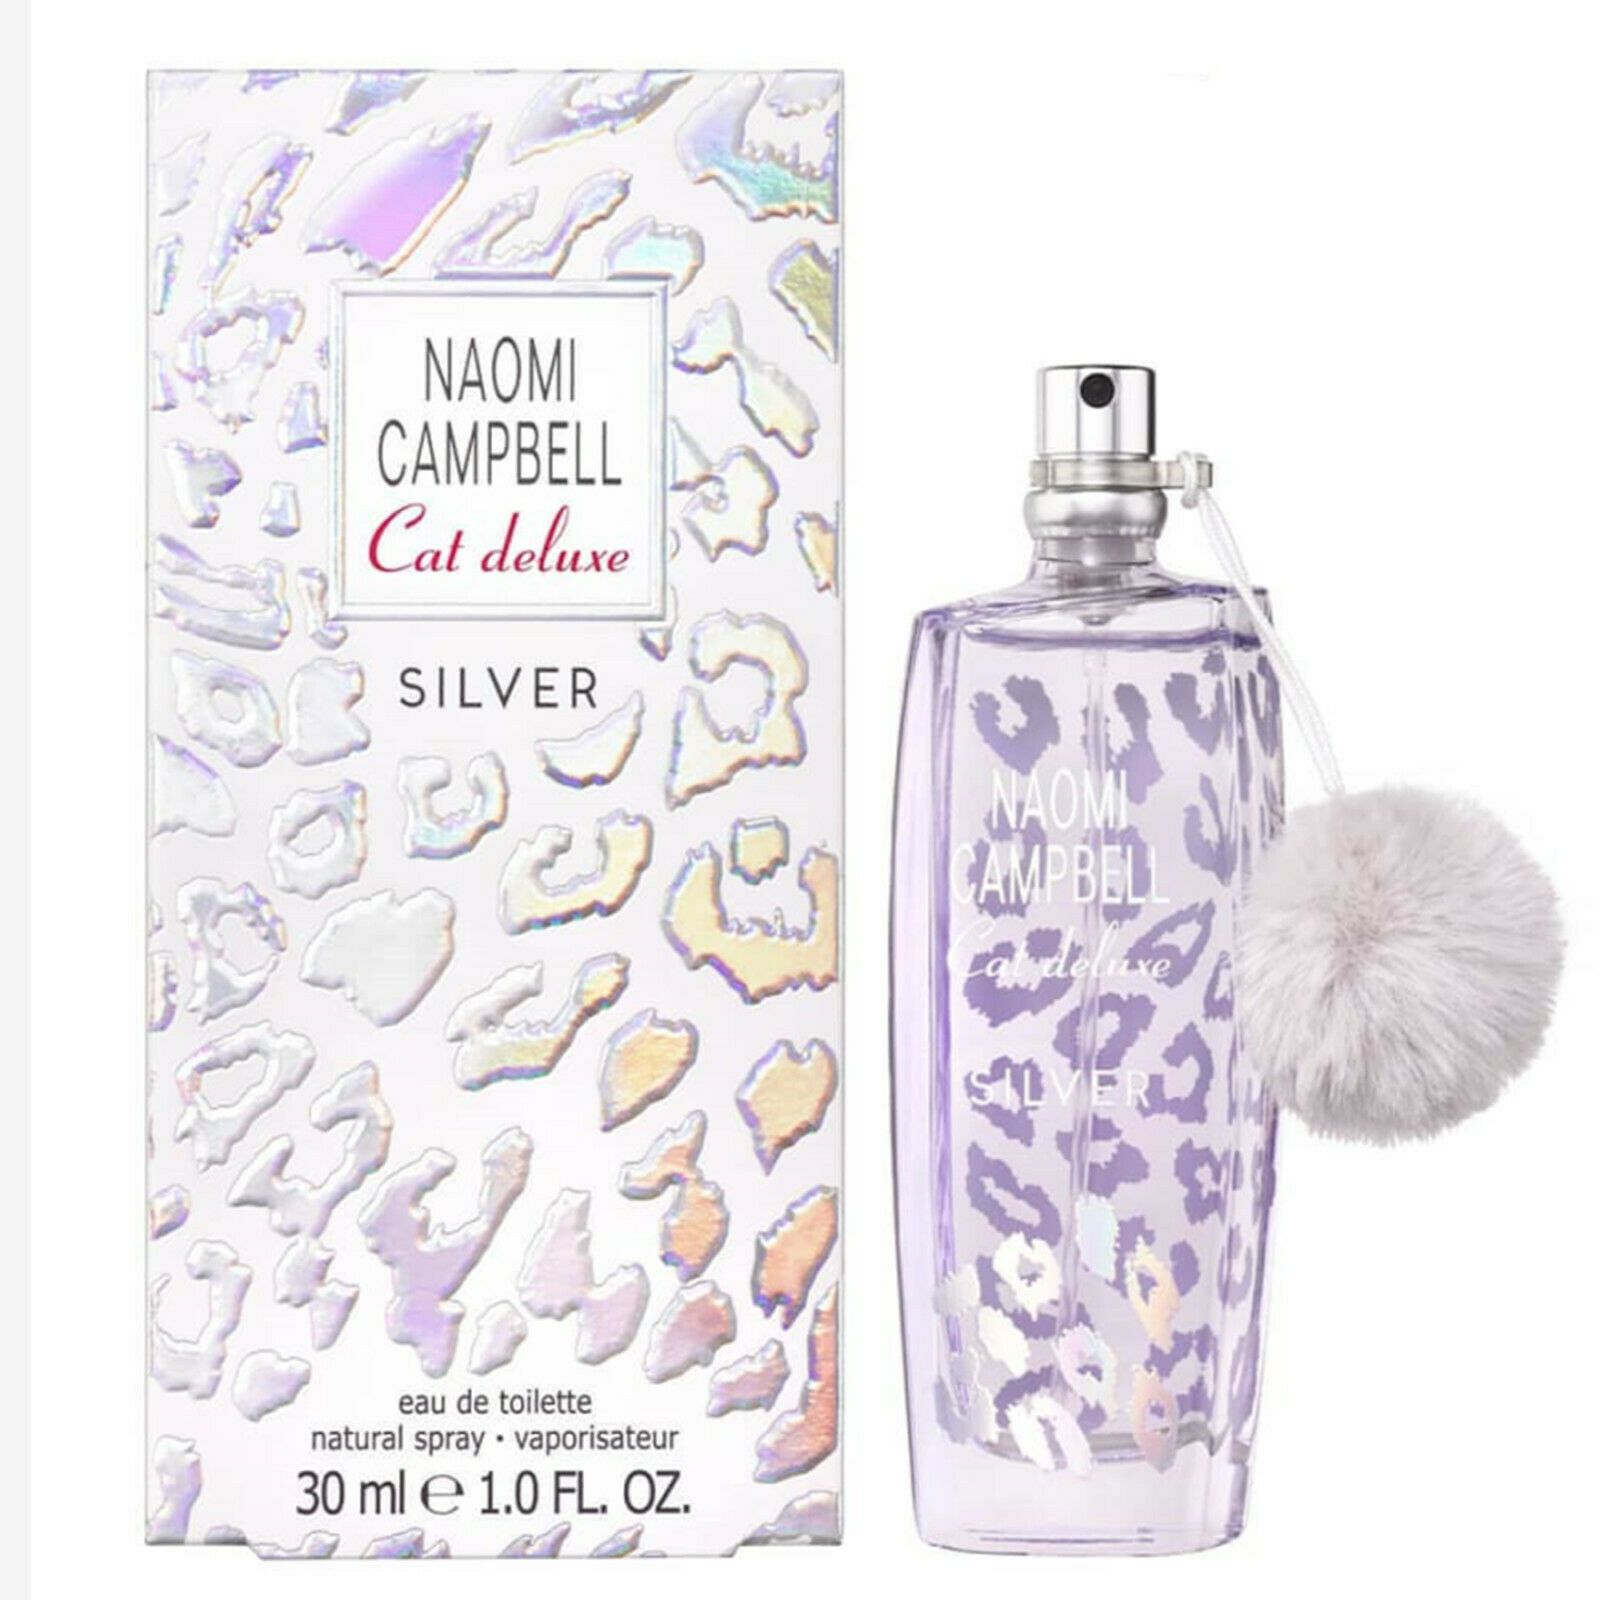 Naomi Campbell cat deluxe silver edt